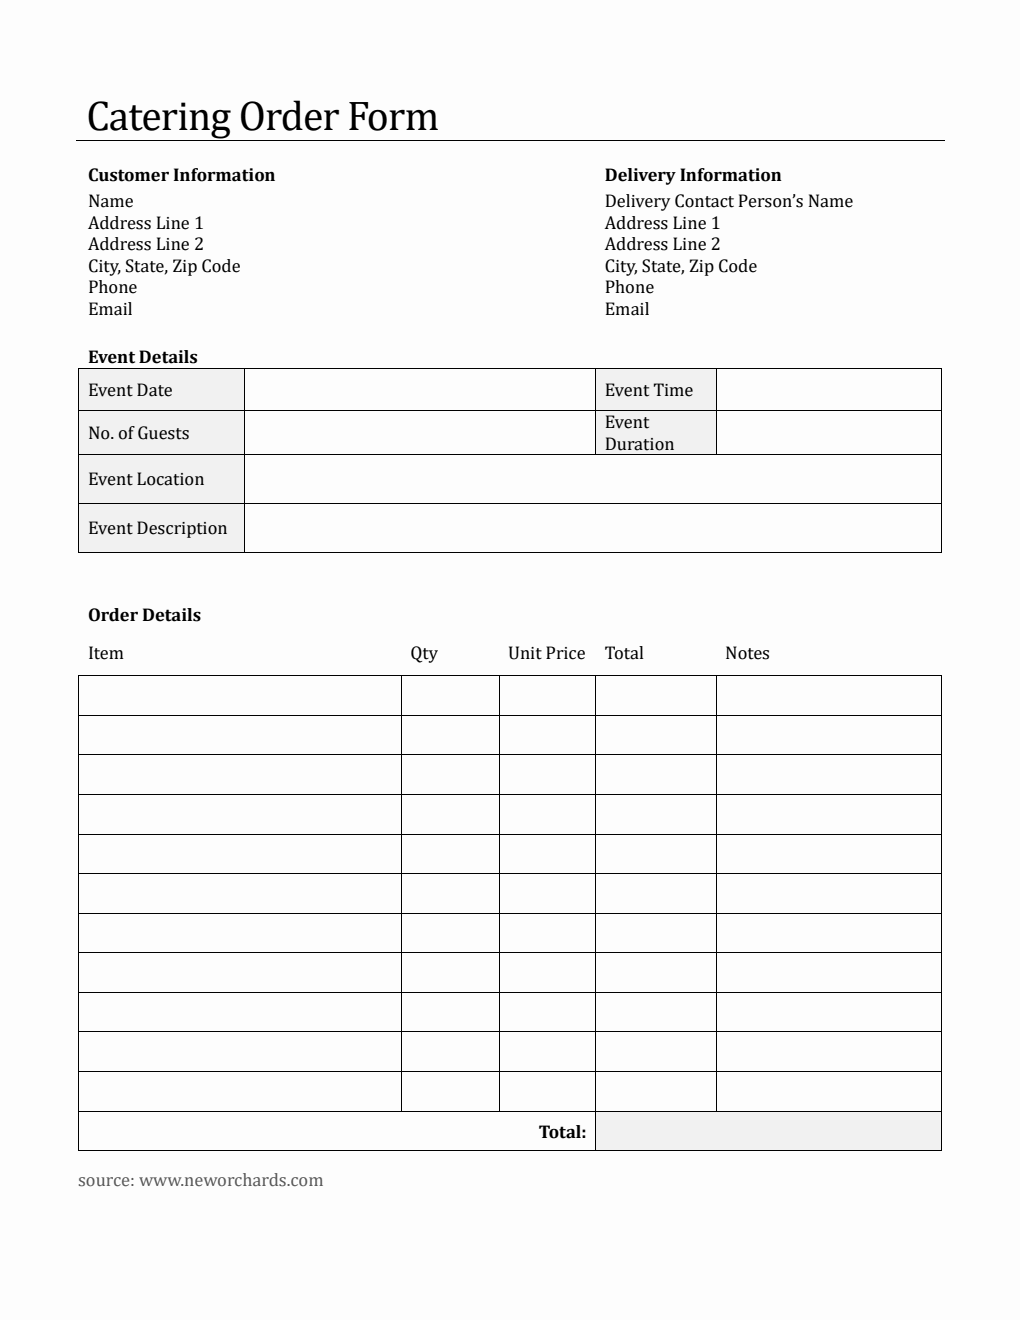 Editable Catering Order Form Template in Word